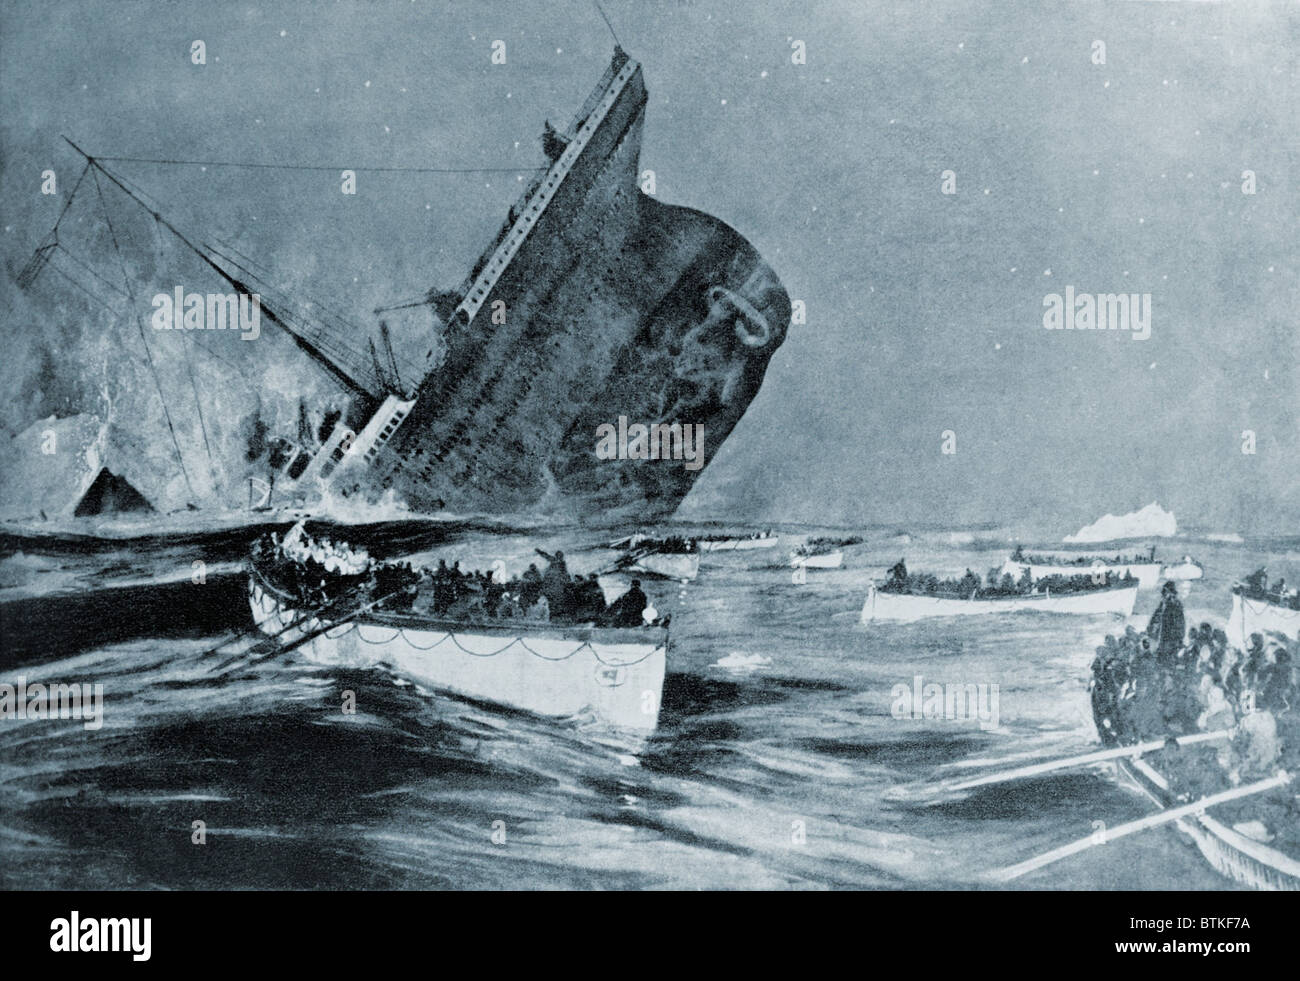 Sinking of the Titanic witnessed by survivors in lifeboats, between 2:00 and 2:20 AM on April 15, 1912. Stock Photo